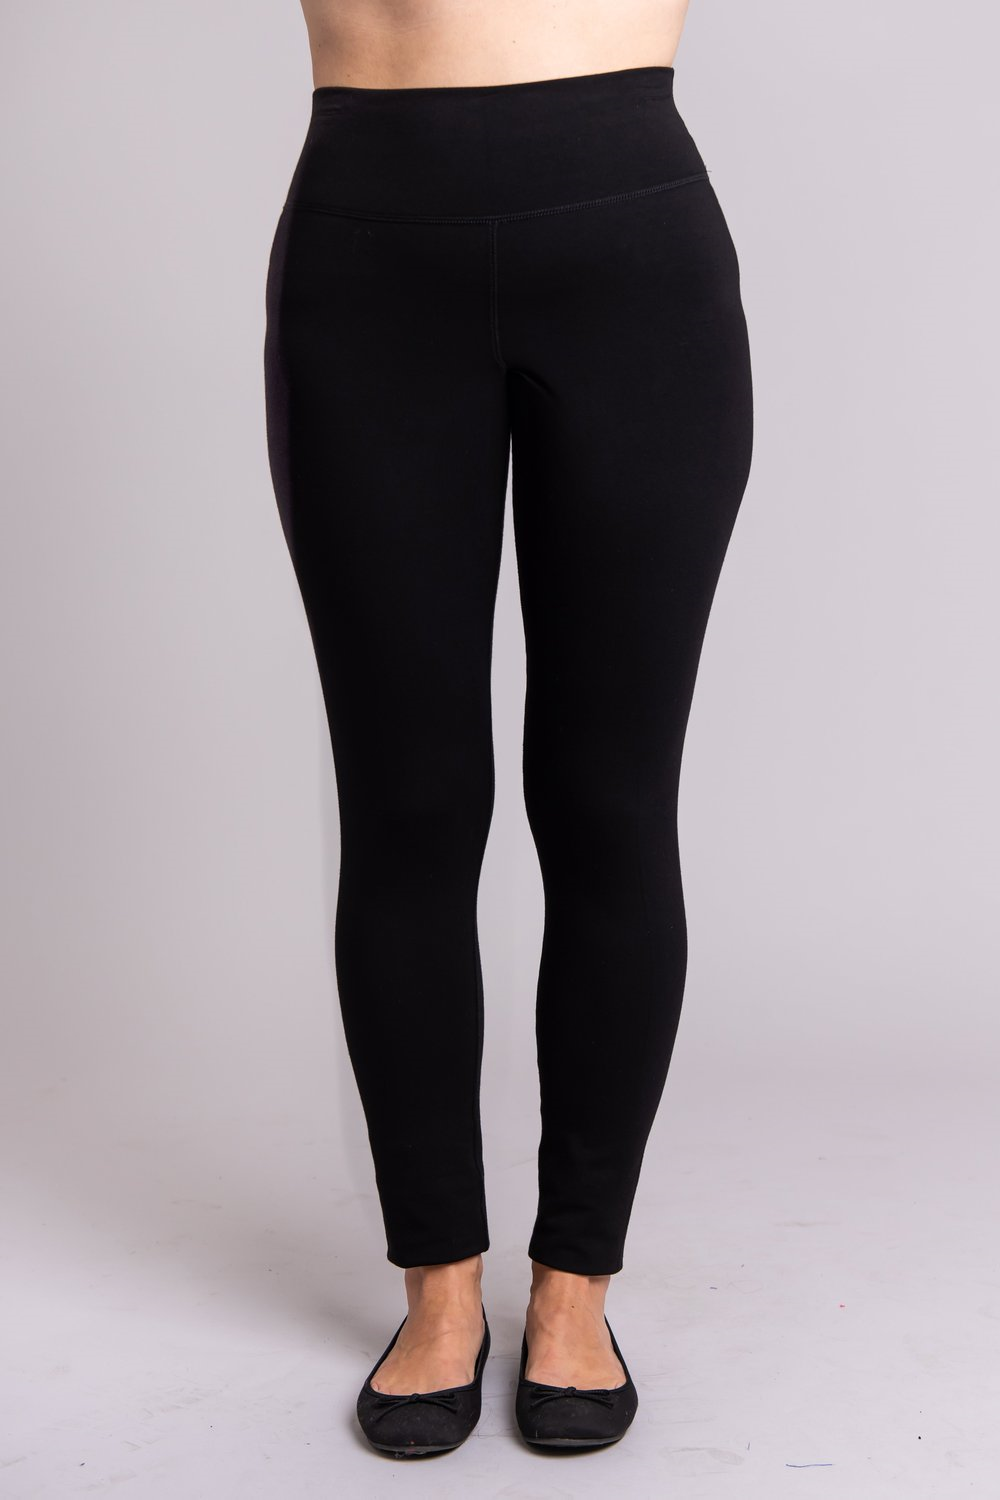 Dixie Leggings are fleece-lined, cozy, soft and warm, you will love them. Comfort and stretch, plus flocked lining that provides ultra-soft insulation against cold and damp. The fabric waistband means no binding and a smooth finish up to your waist. Flat locked seams stay tight, and a gusset prevents splitting.  Fabrication: 67% Bamboo, 28% Cotton, 5% Lycra  BLUE SKY $65.00 colour Black